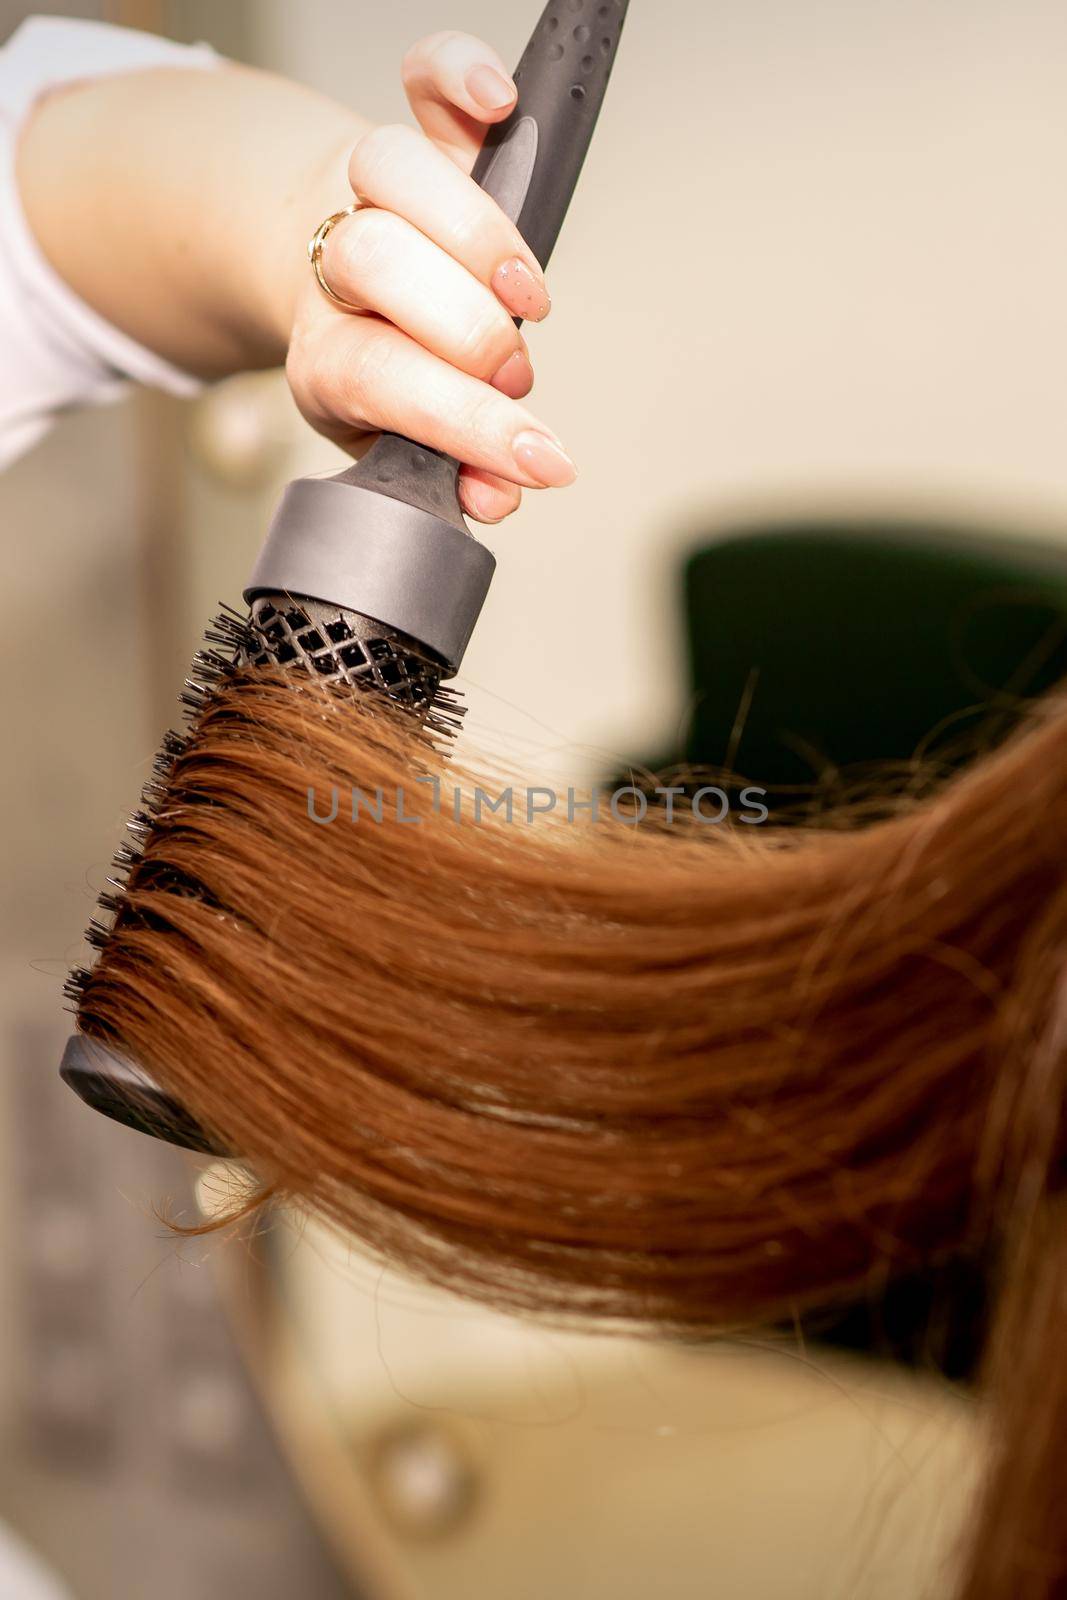 A hairdresser is drying long brown hair with a hairdryer and round brush in a beauty salon